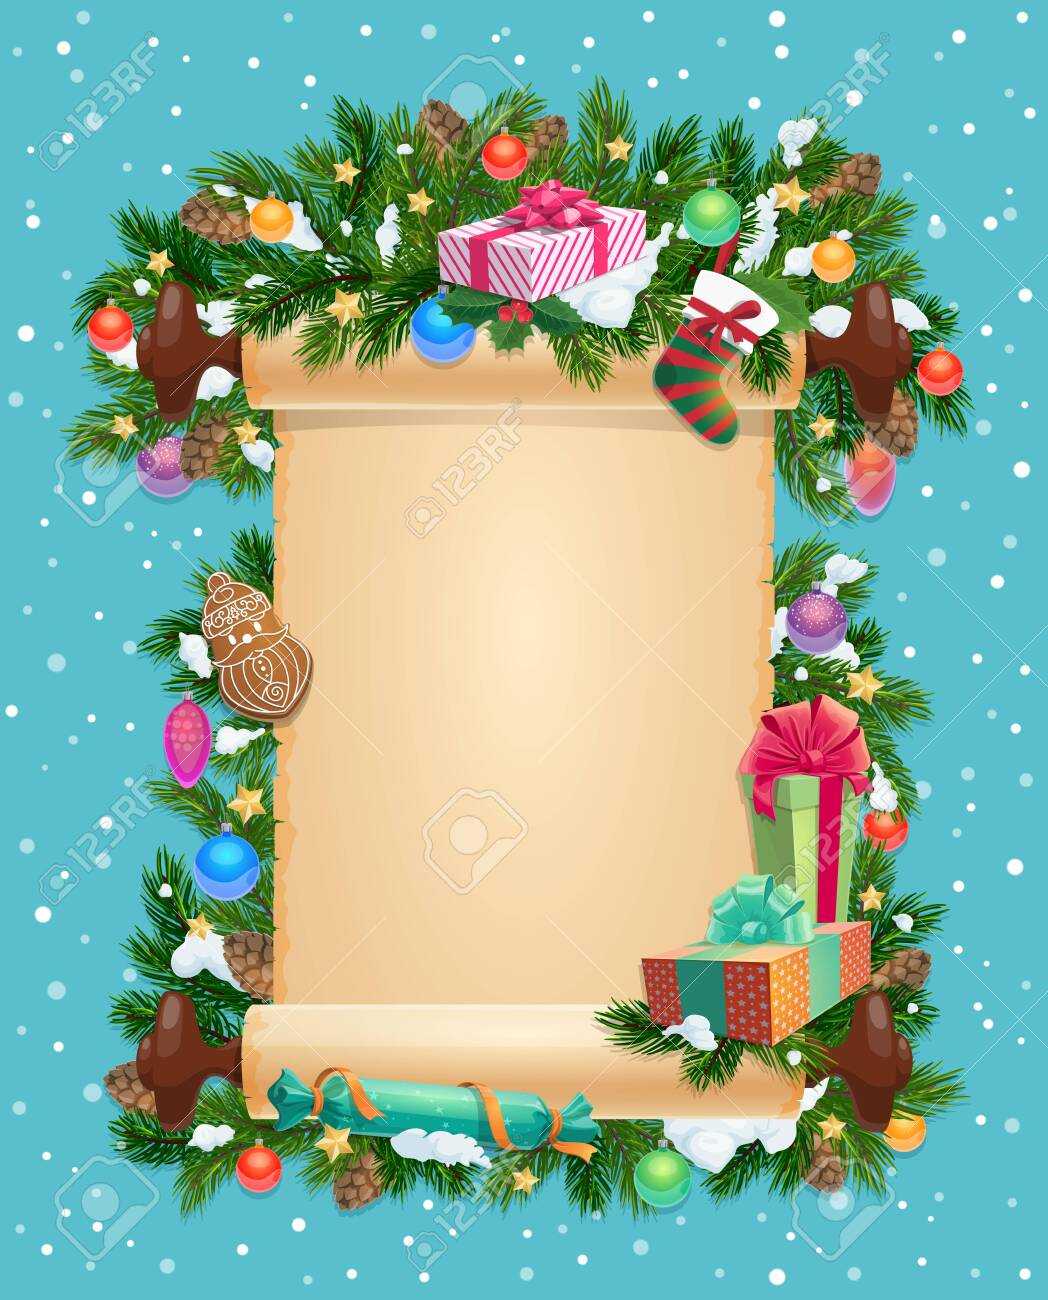 Merry Christmas Card Template, Blank Ingot And Winter Holiday Pertaining To Blank Christmas Card Templates Free